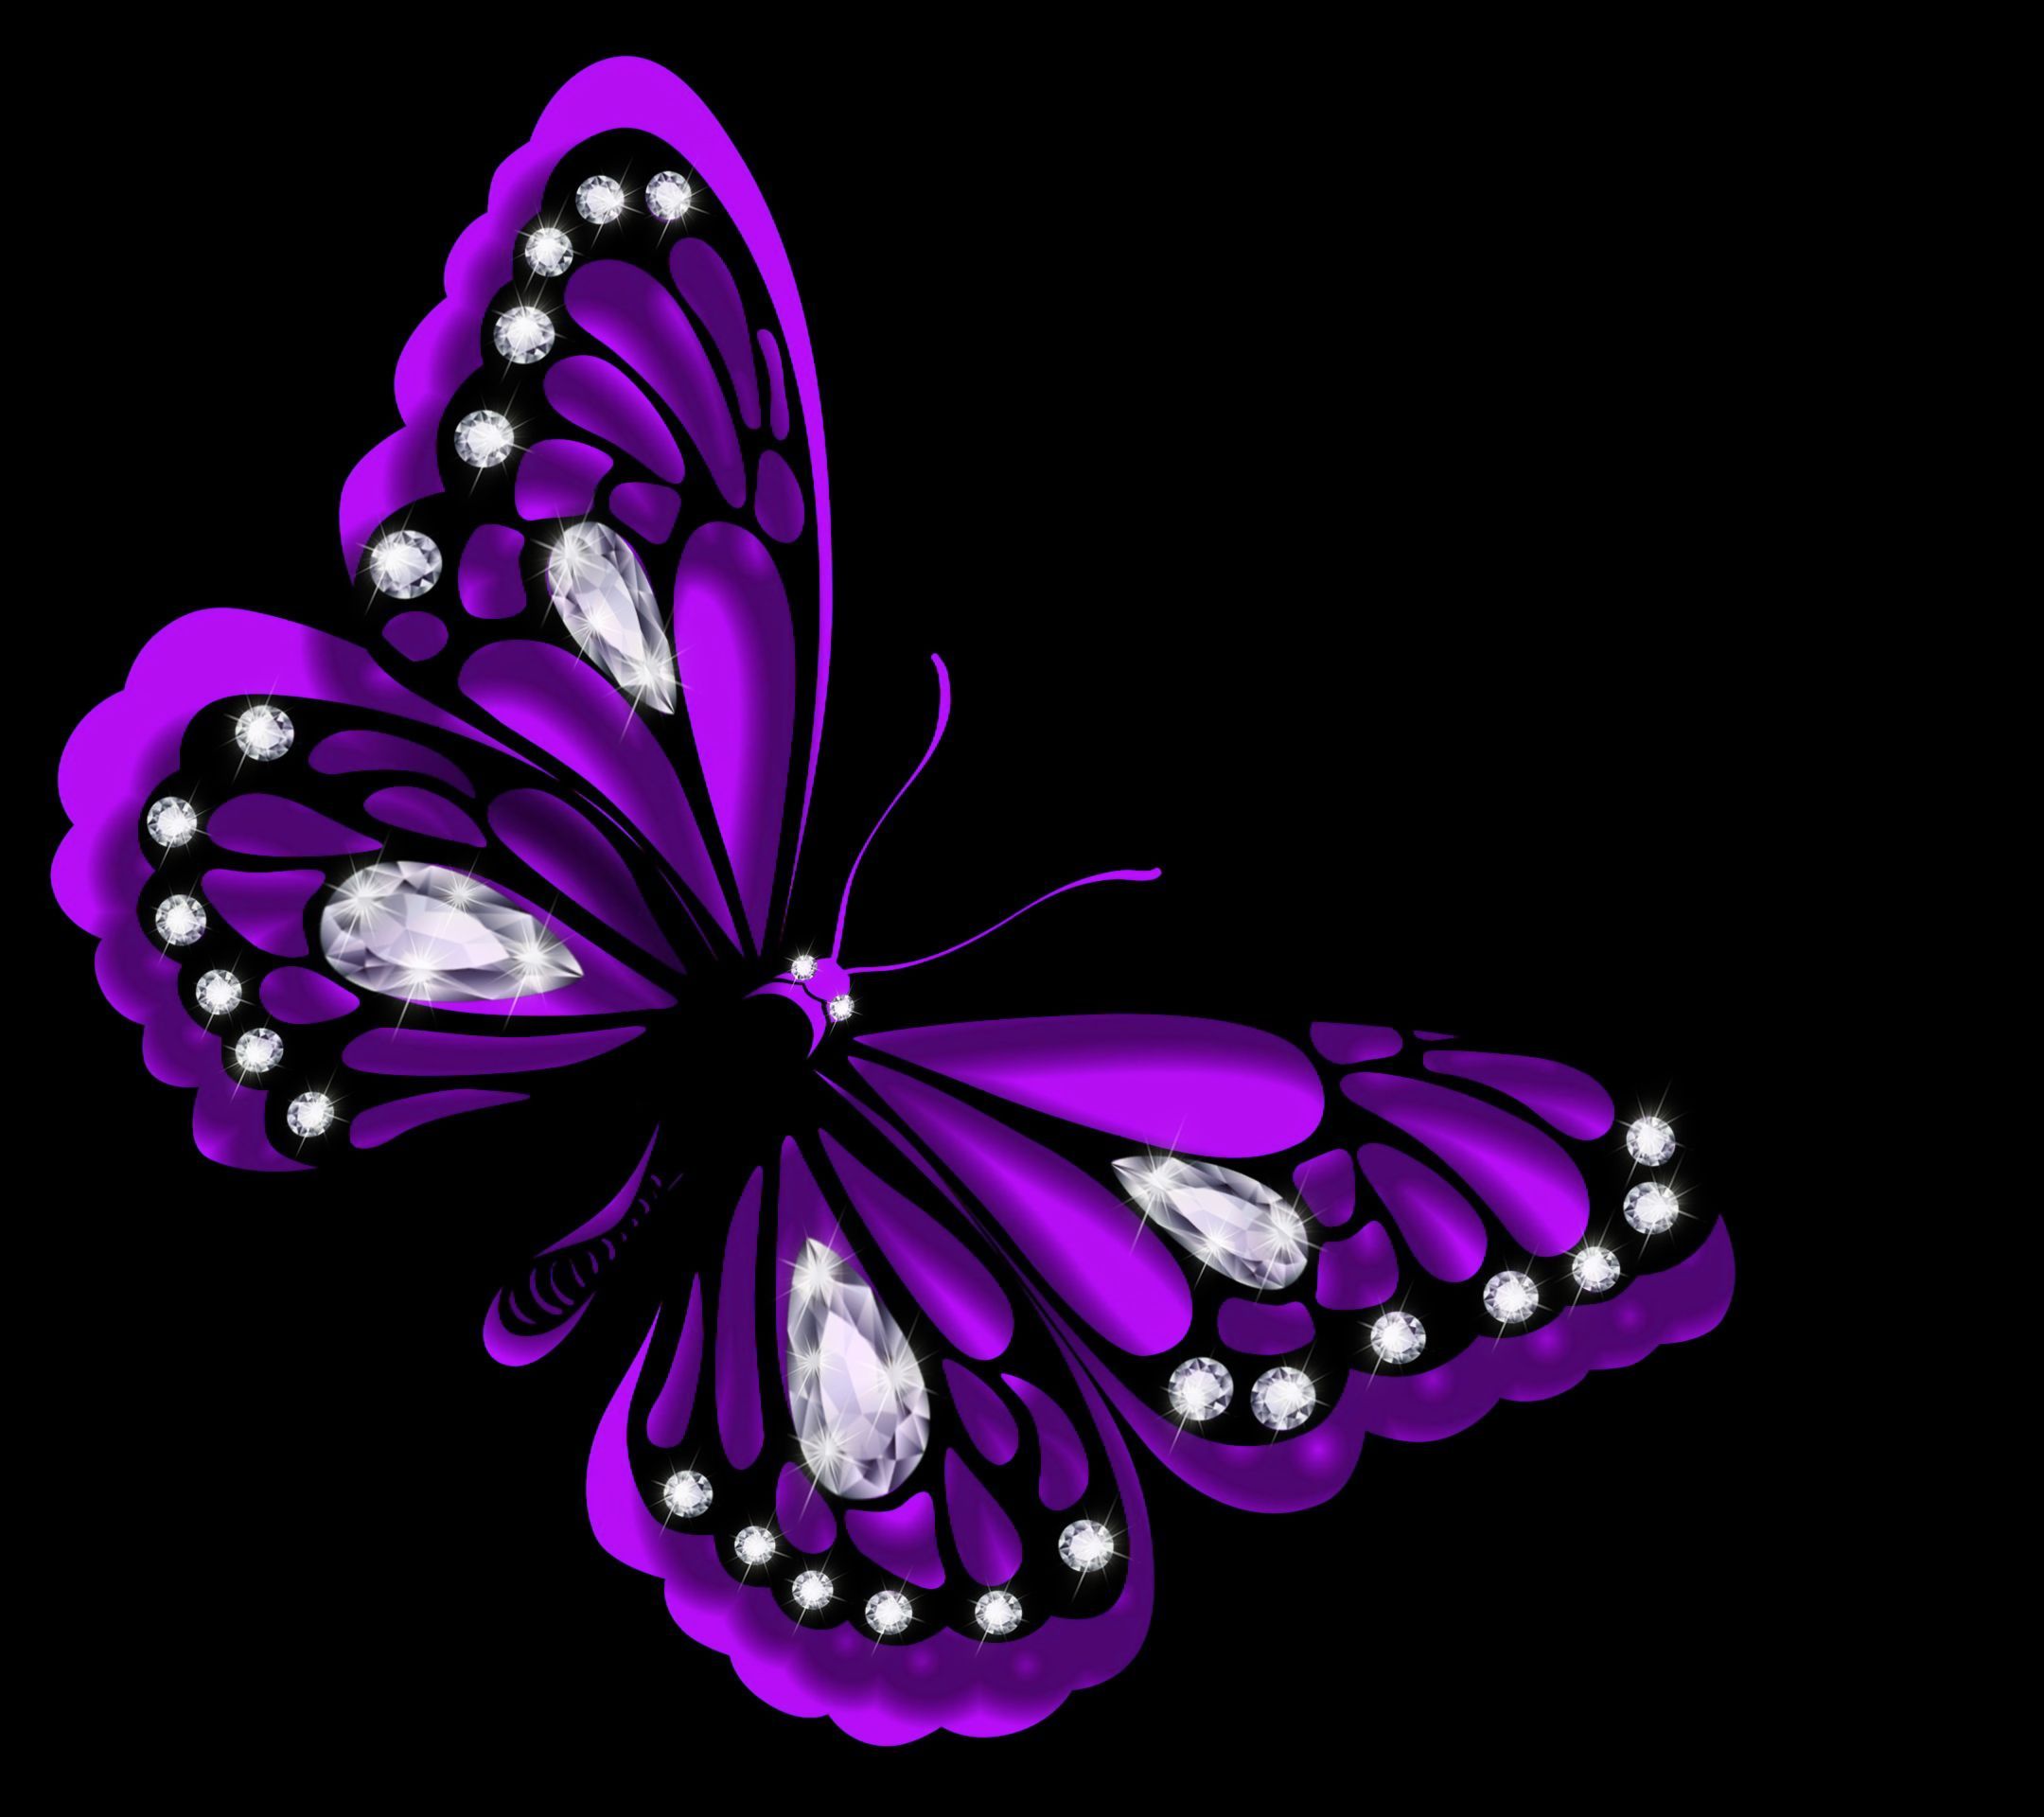 purple and black butterfly background